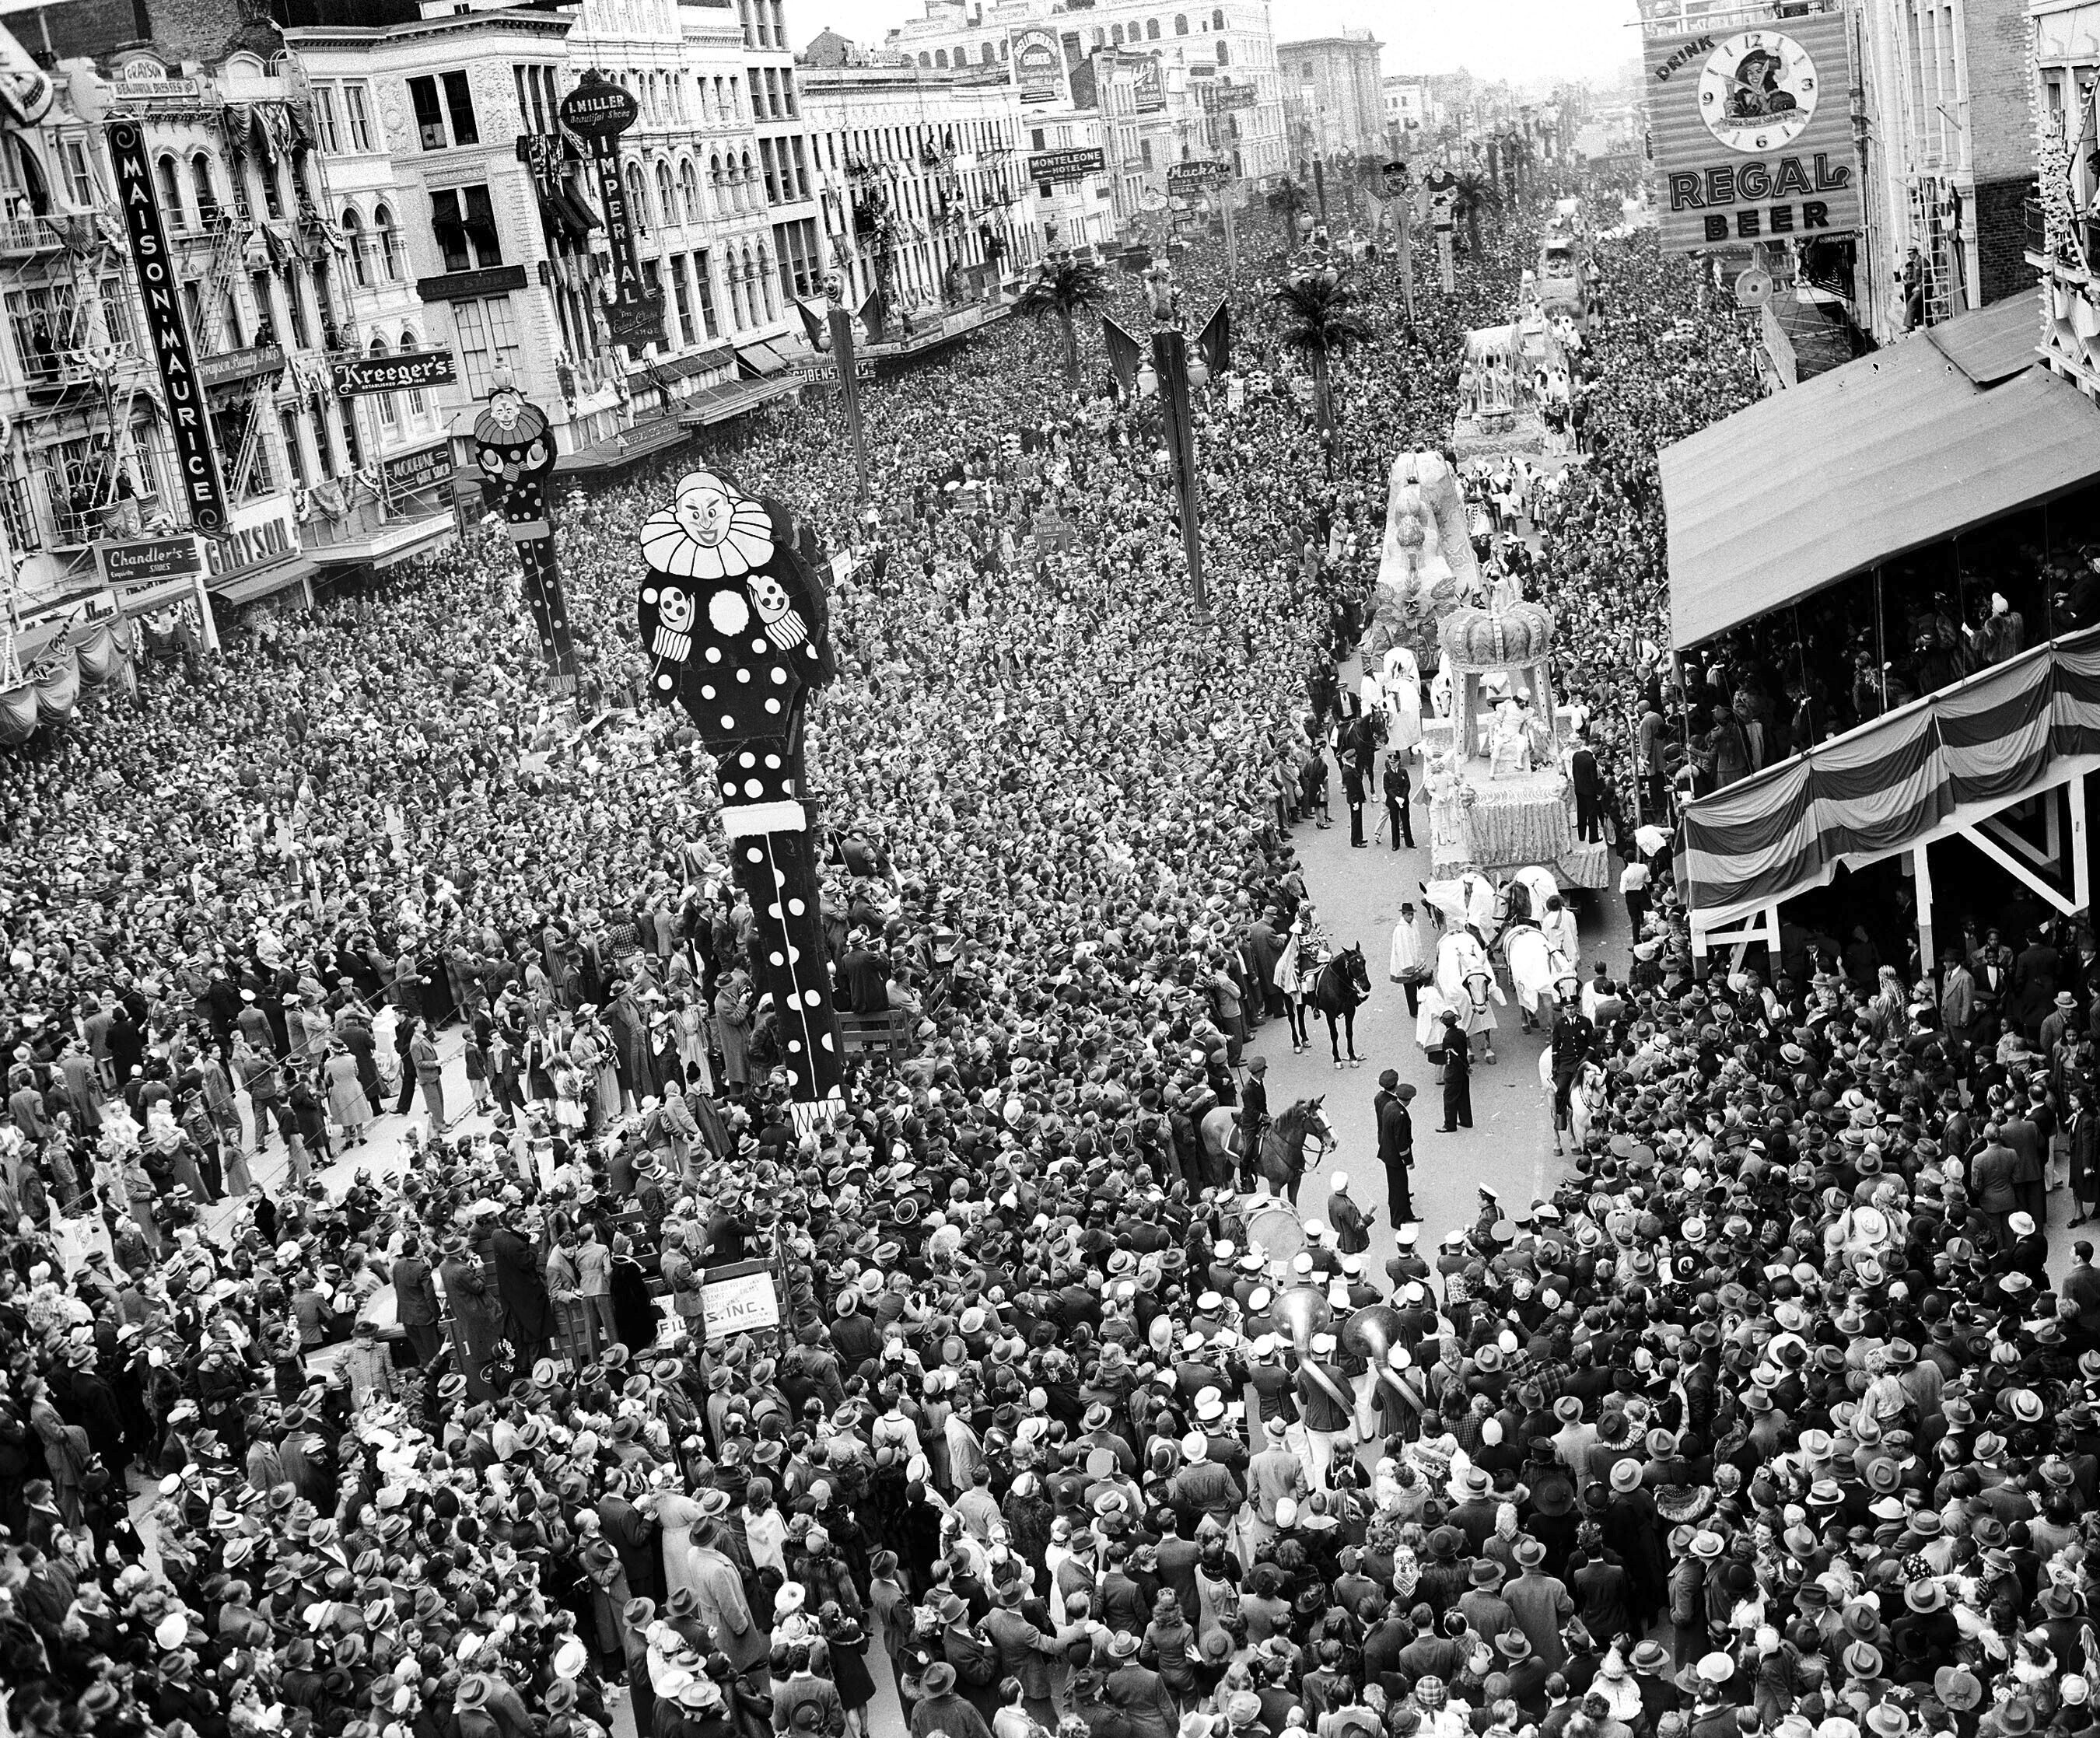 A look at Mardi Gras festivities in New Orleans through the years